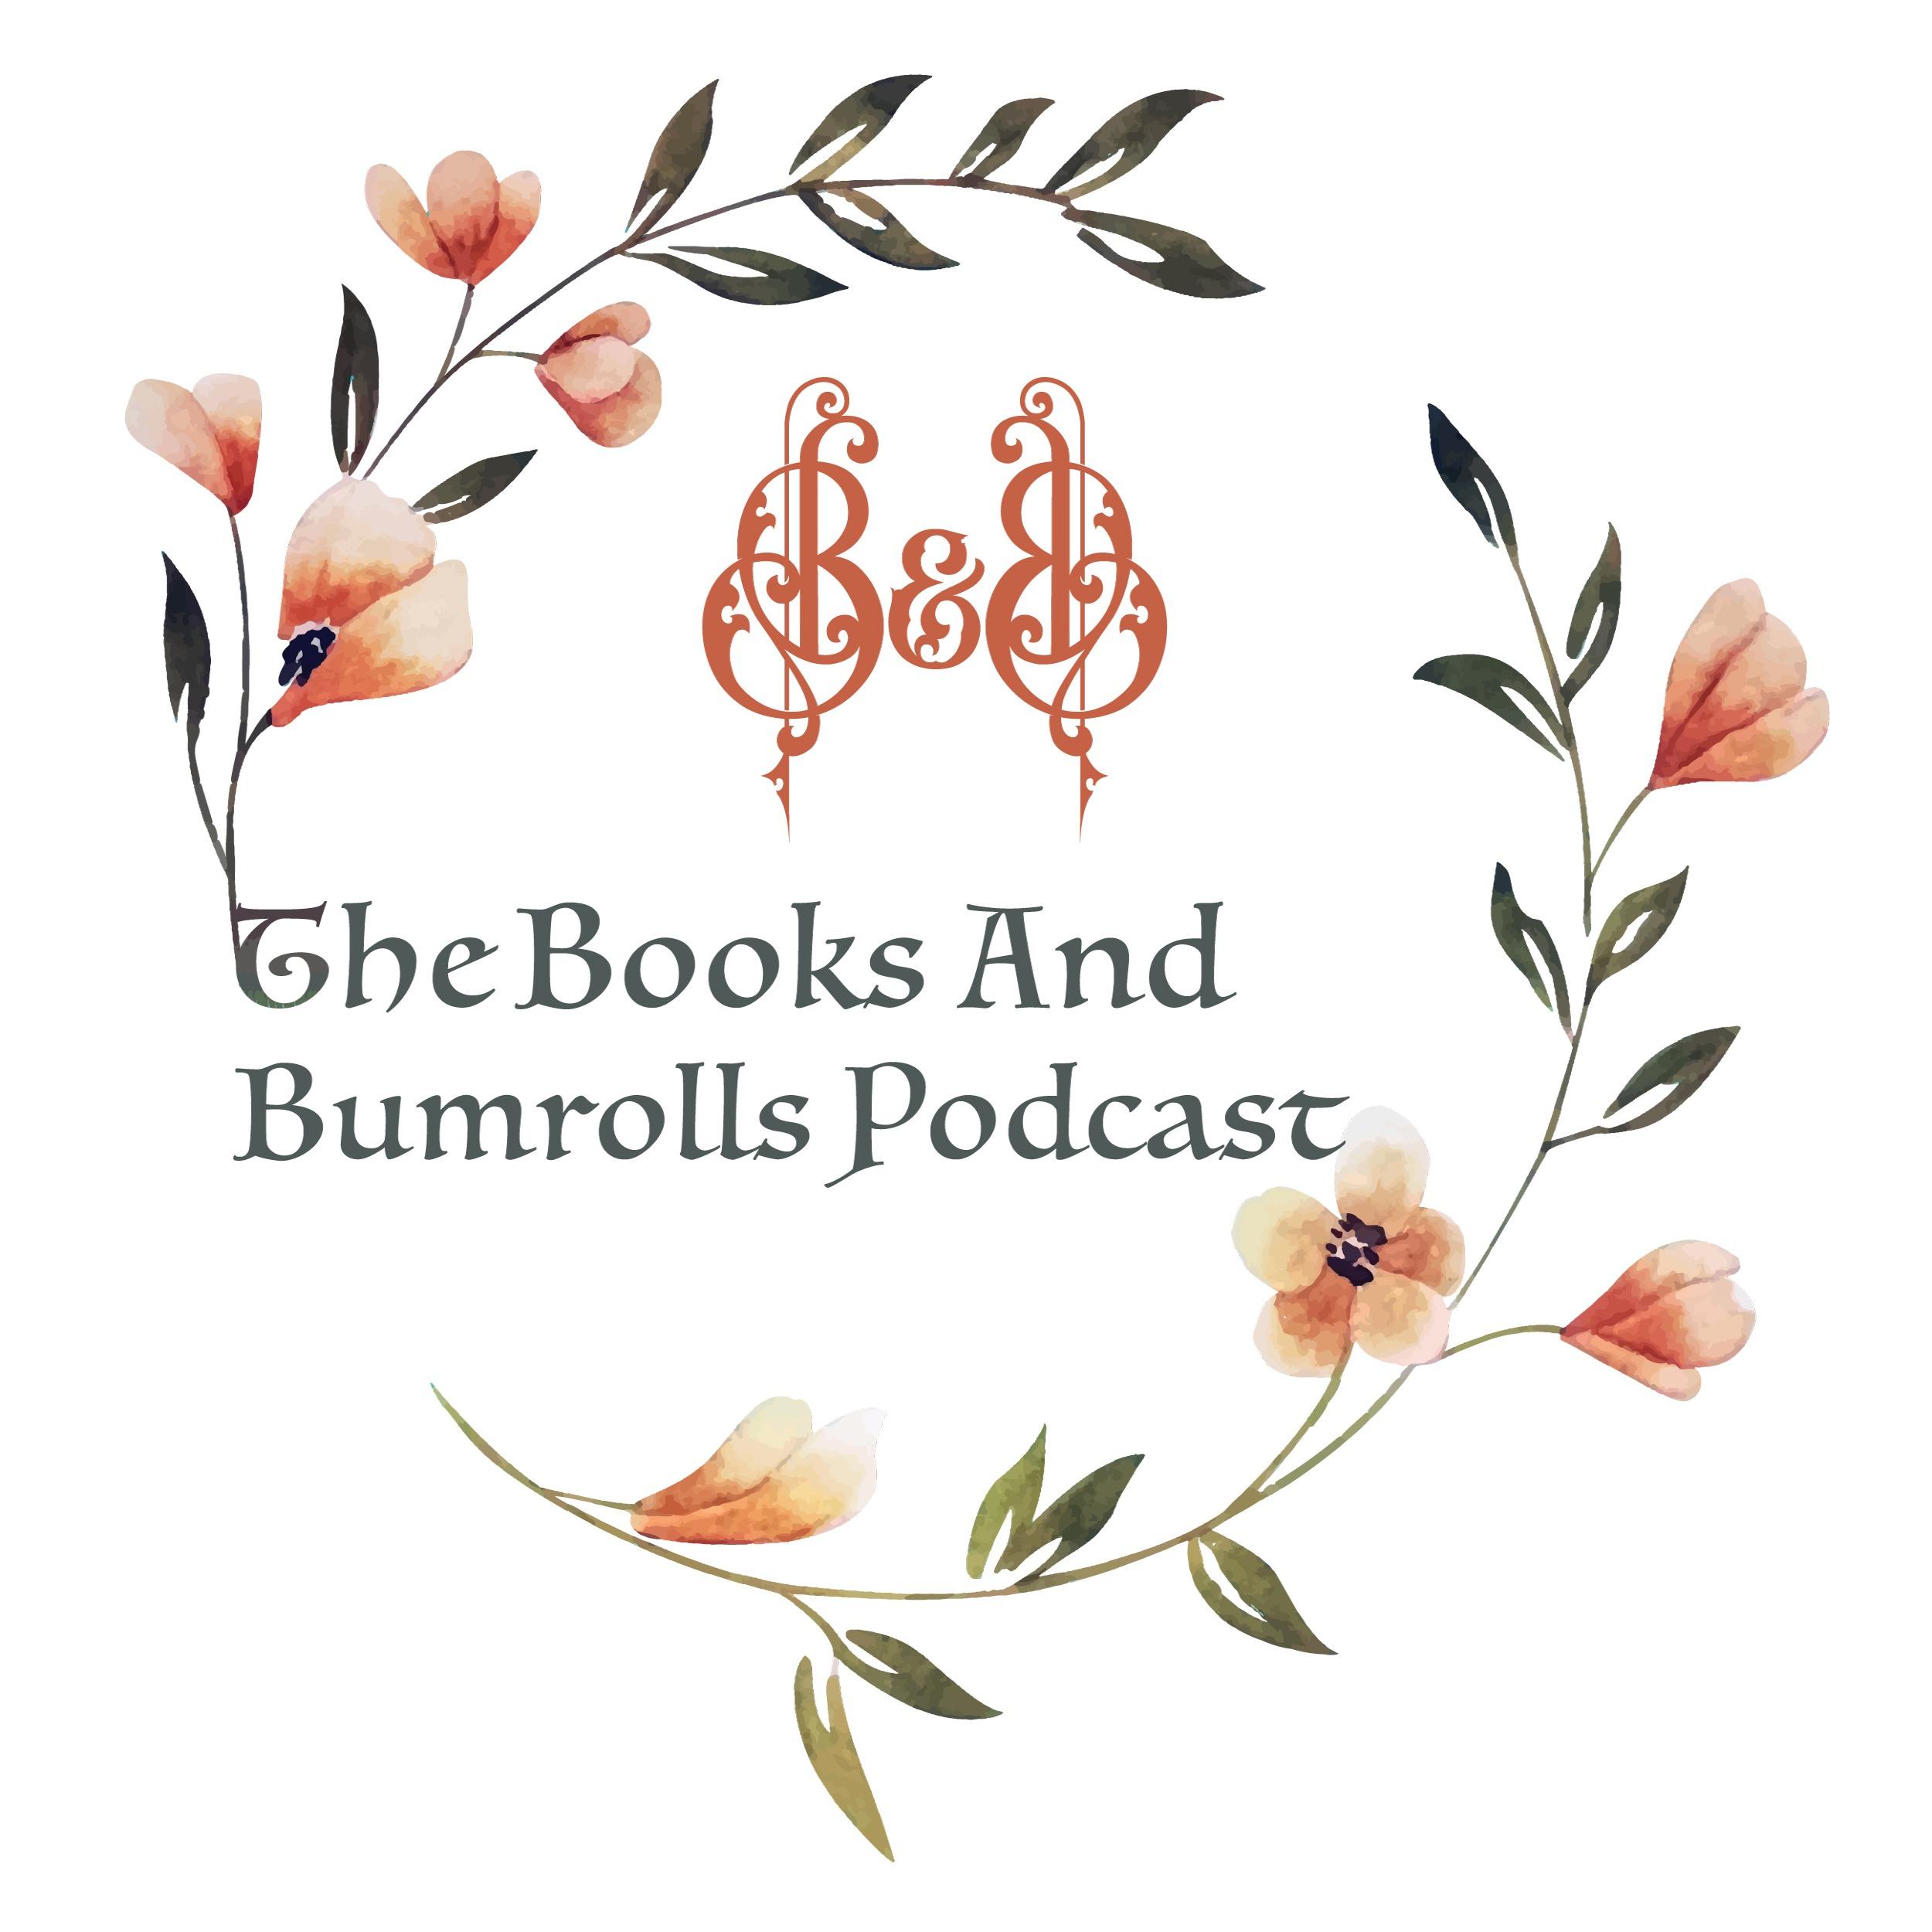 The Books and Bumrolls Podcast